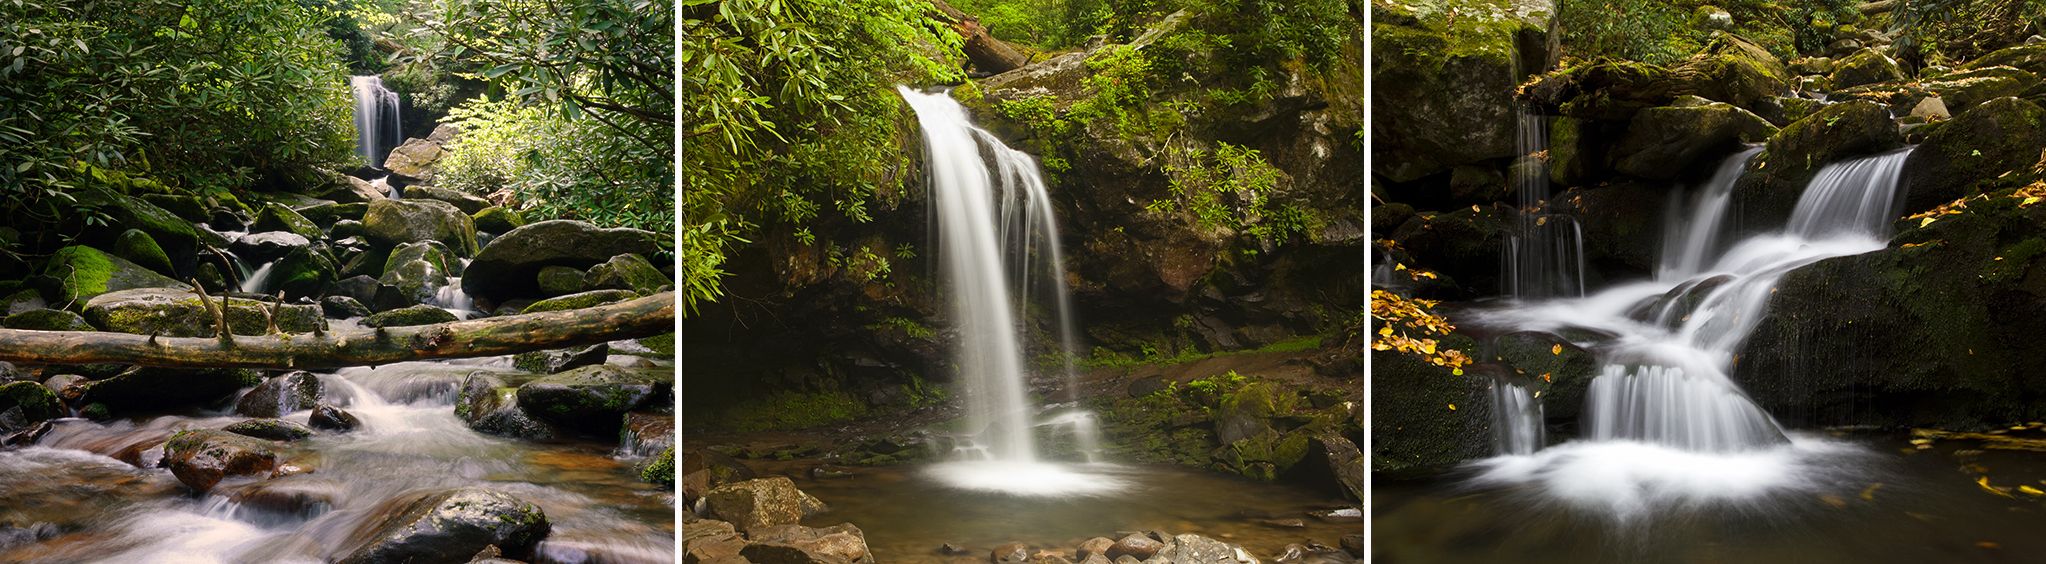 Grotto Falls at Great Smoky Mountains National Park